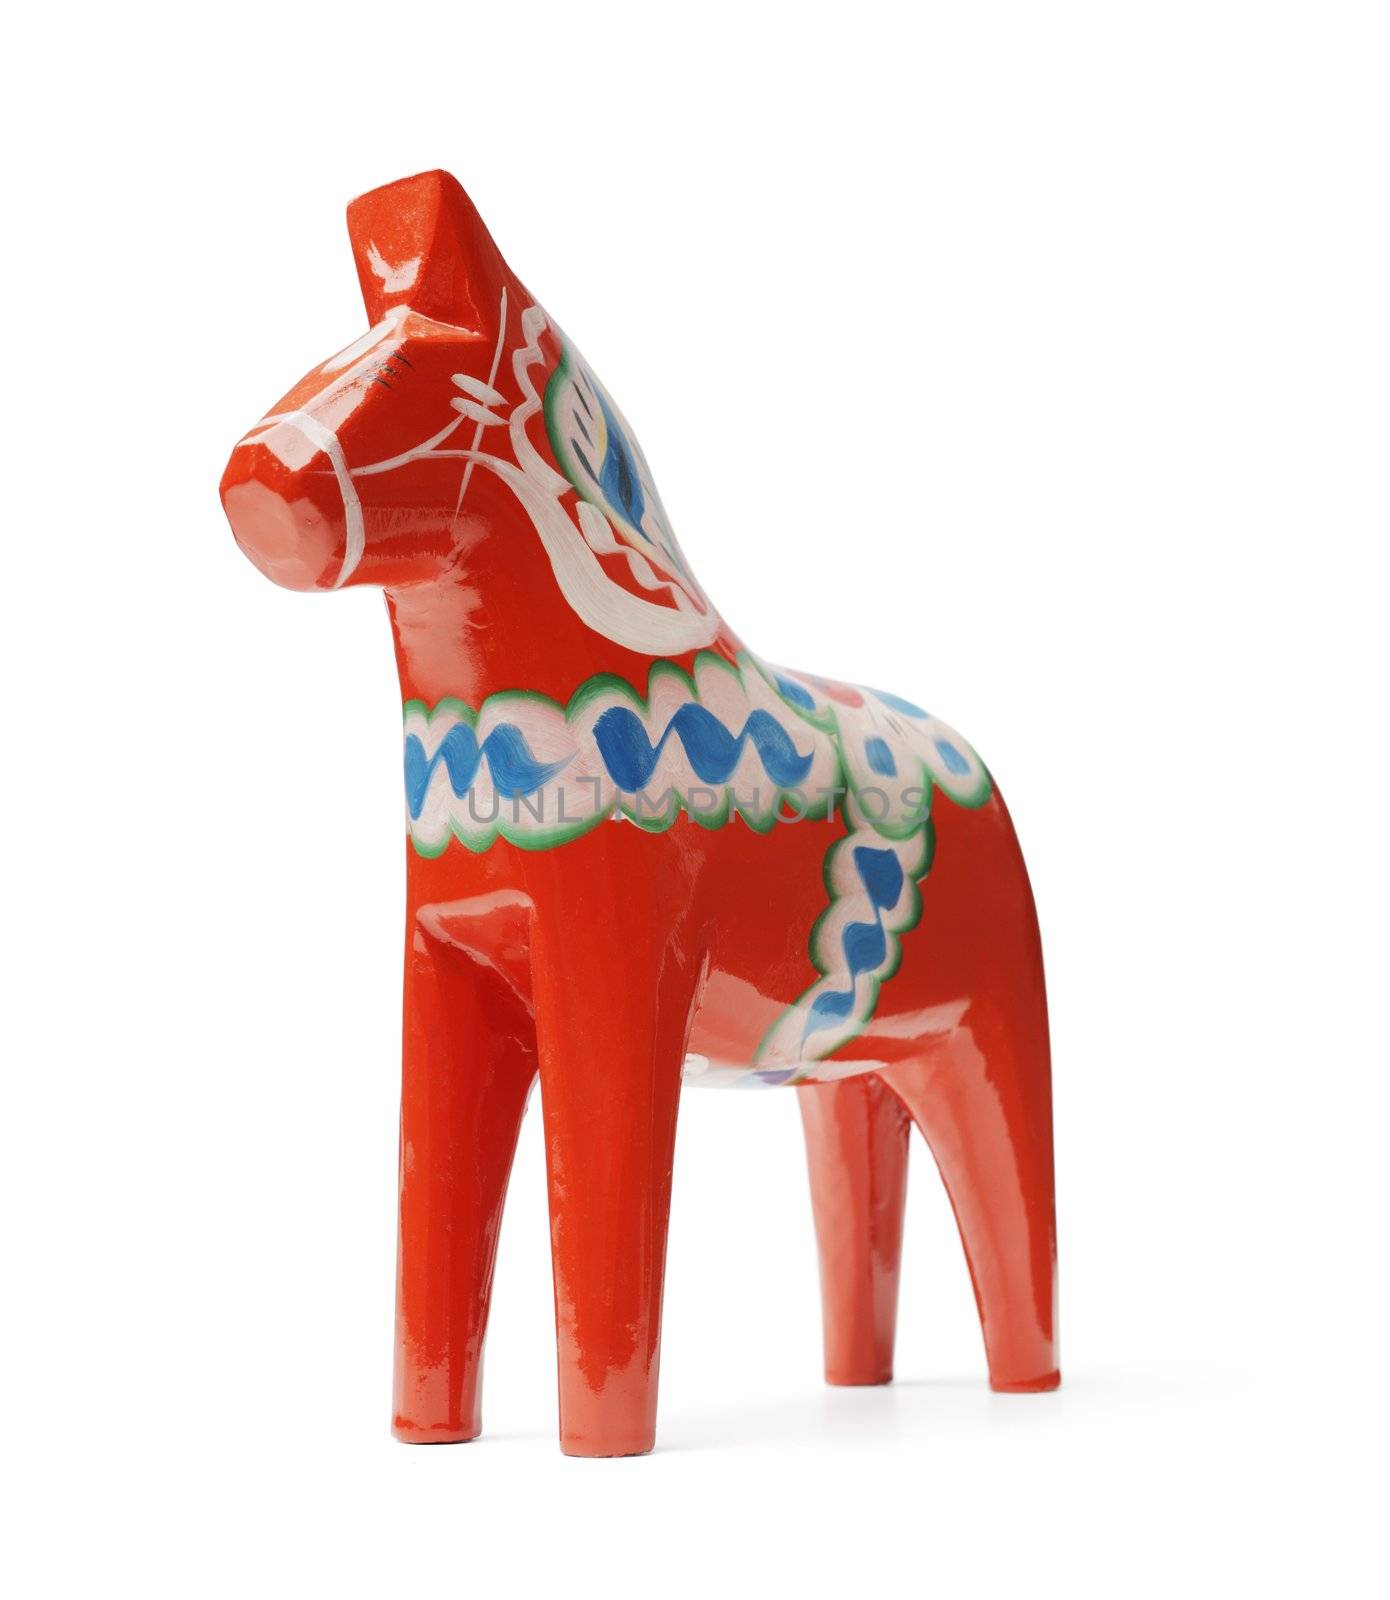 A Hand-made traditional wooden Dalecarlian Horse ("Dalahast") is a symbol of Swedish Dalarna and Sweden in general.